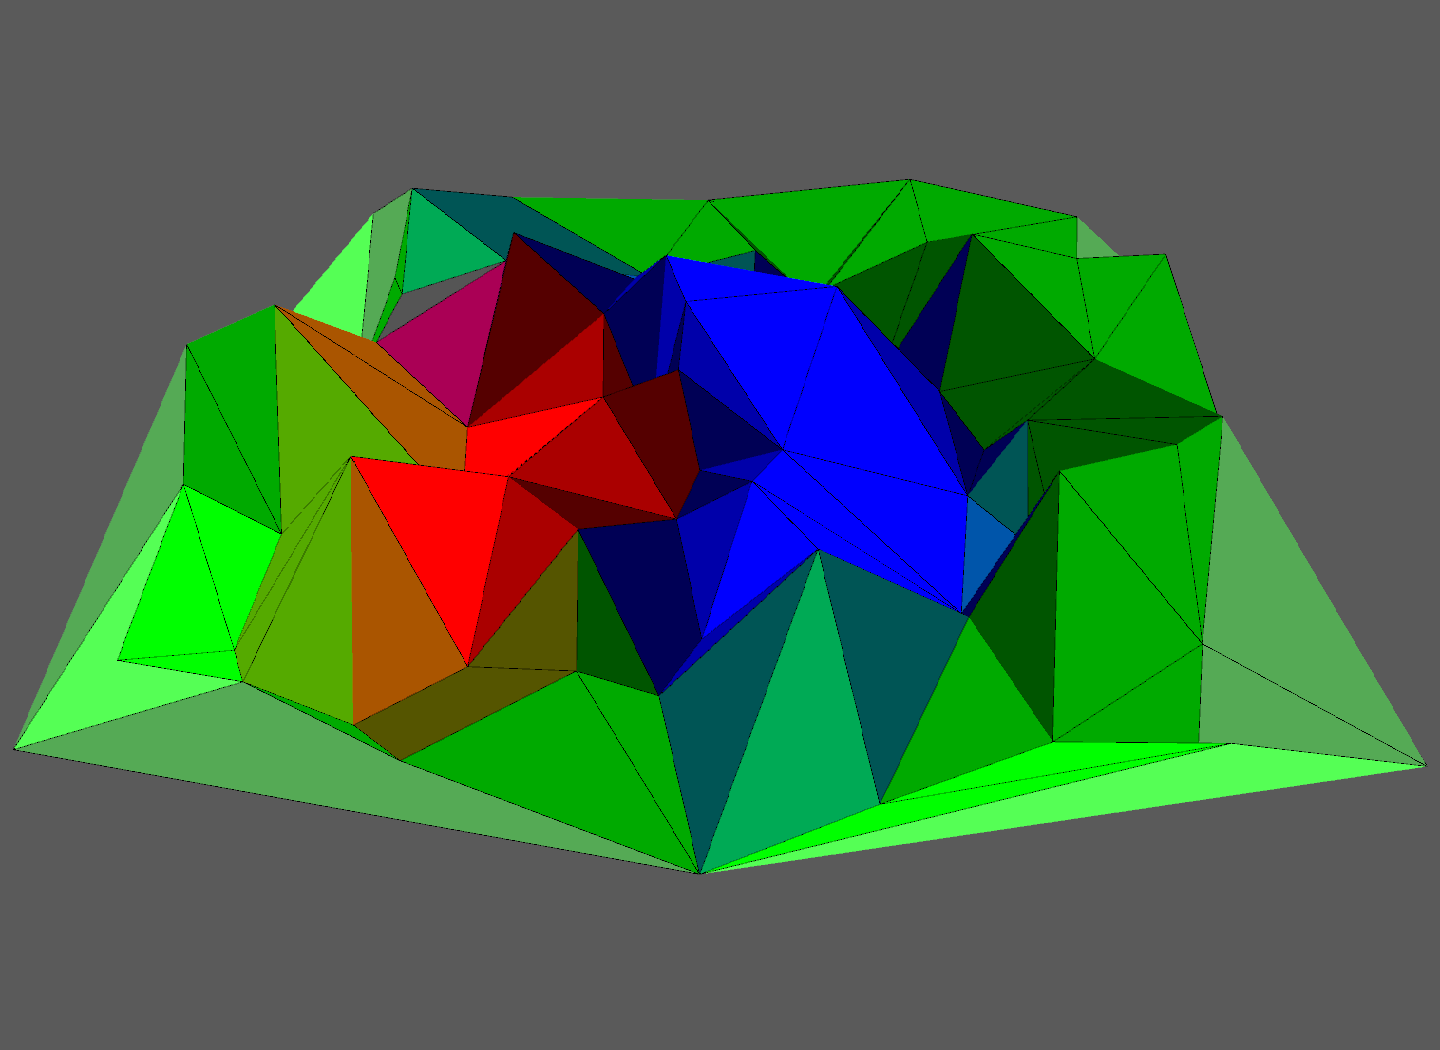 3D rendering of multi-colored, pyramidal shapes.